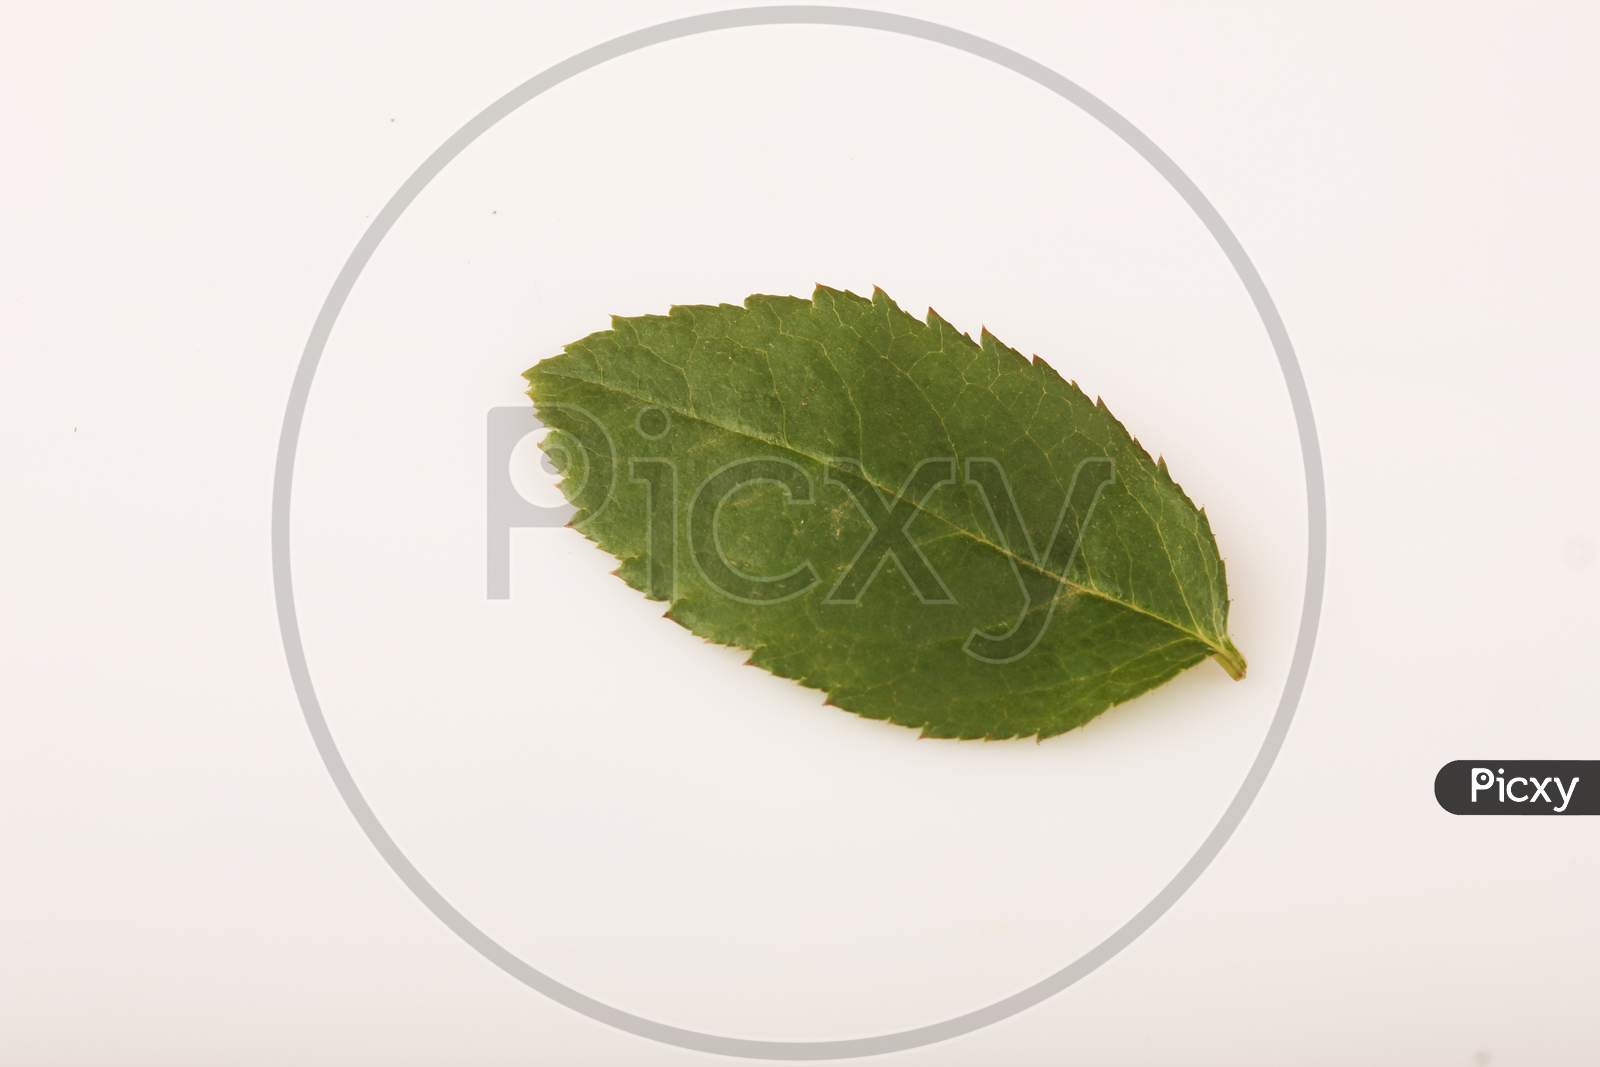 Rose Flower Leaf Over an isolated white Background